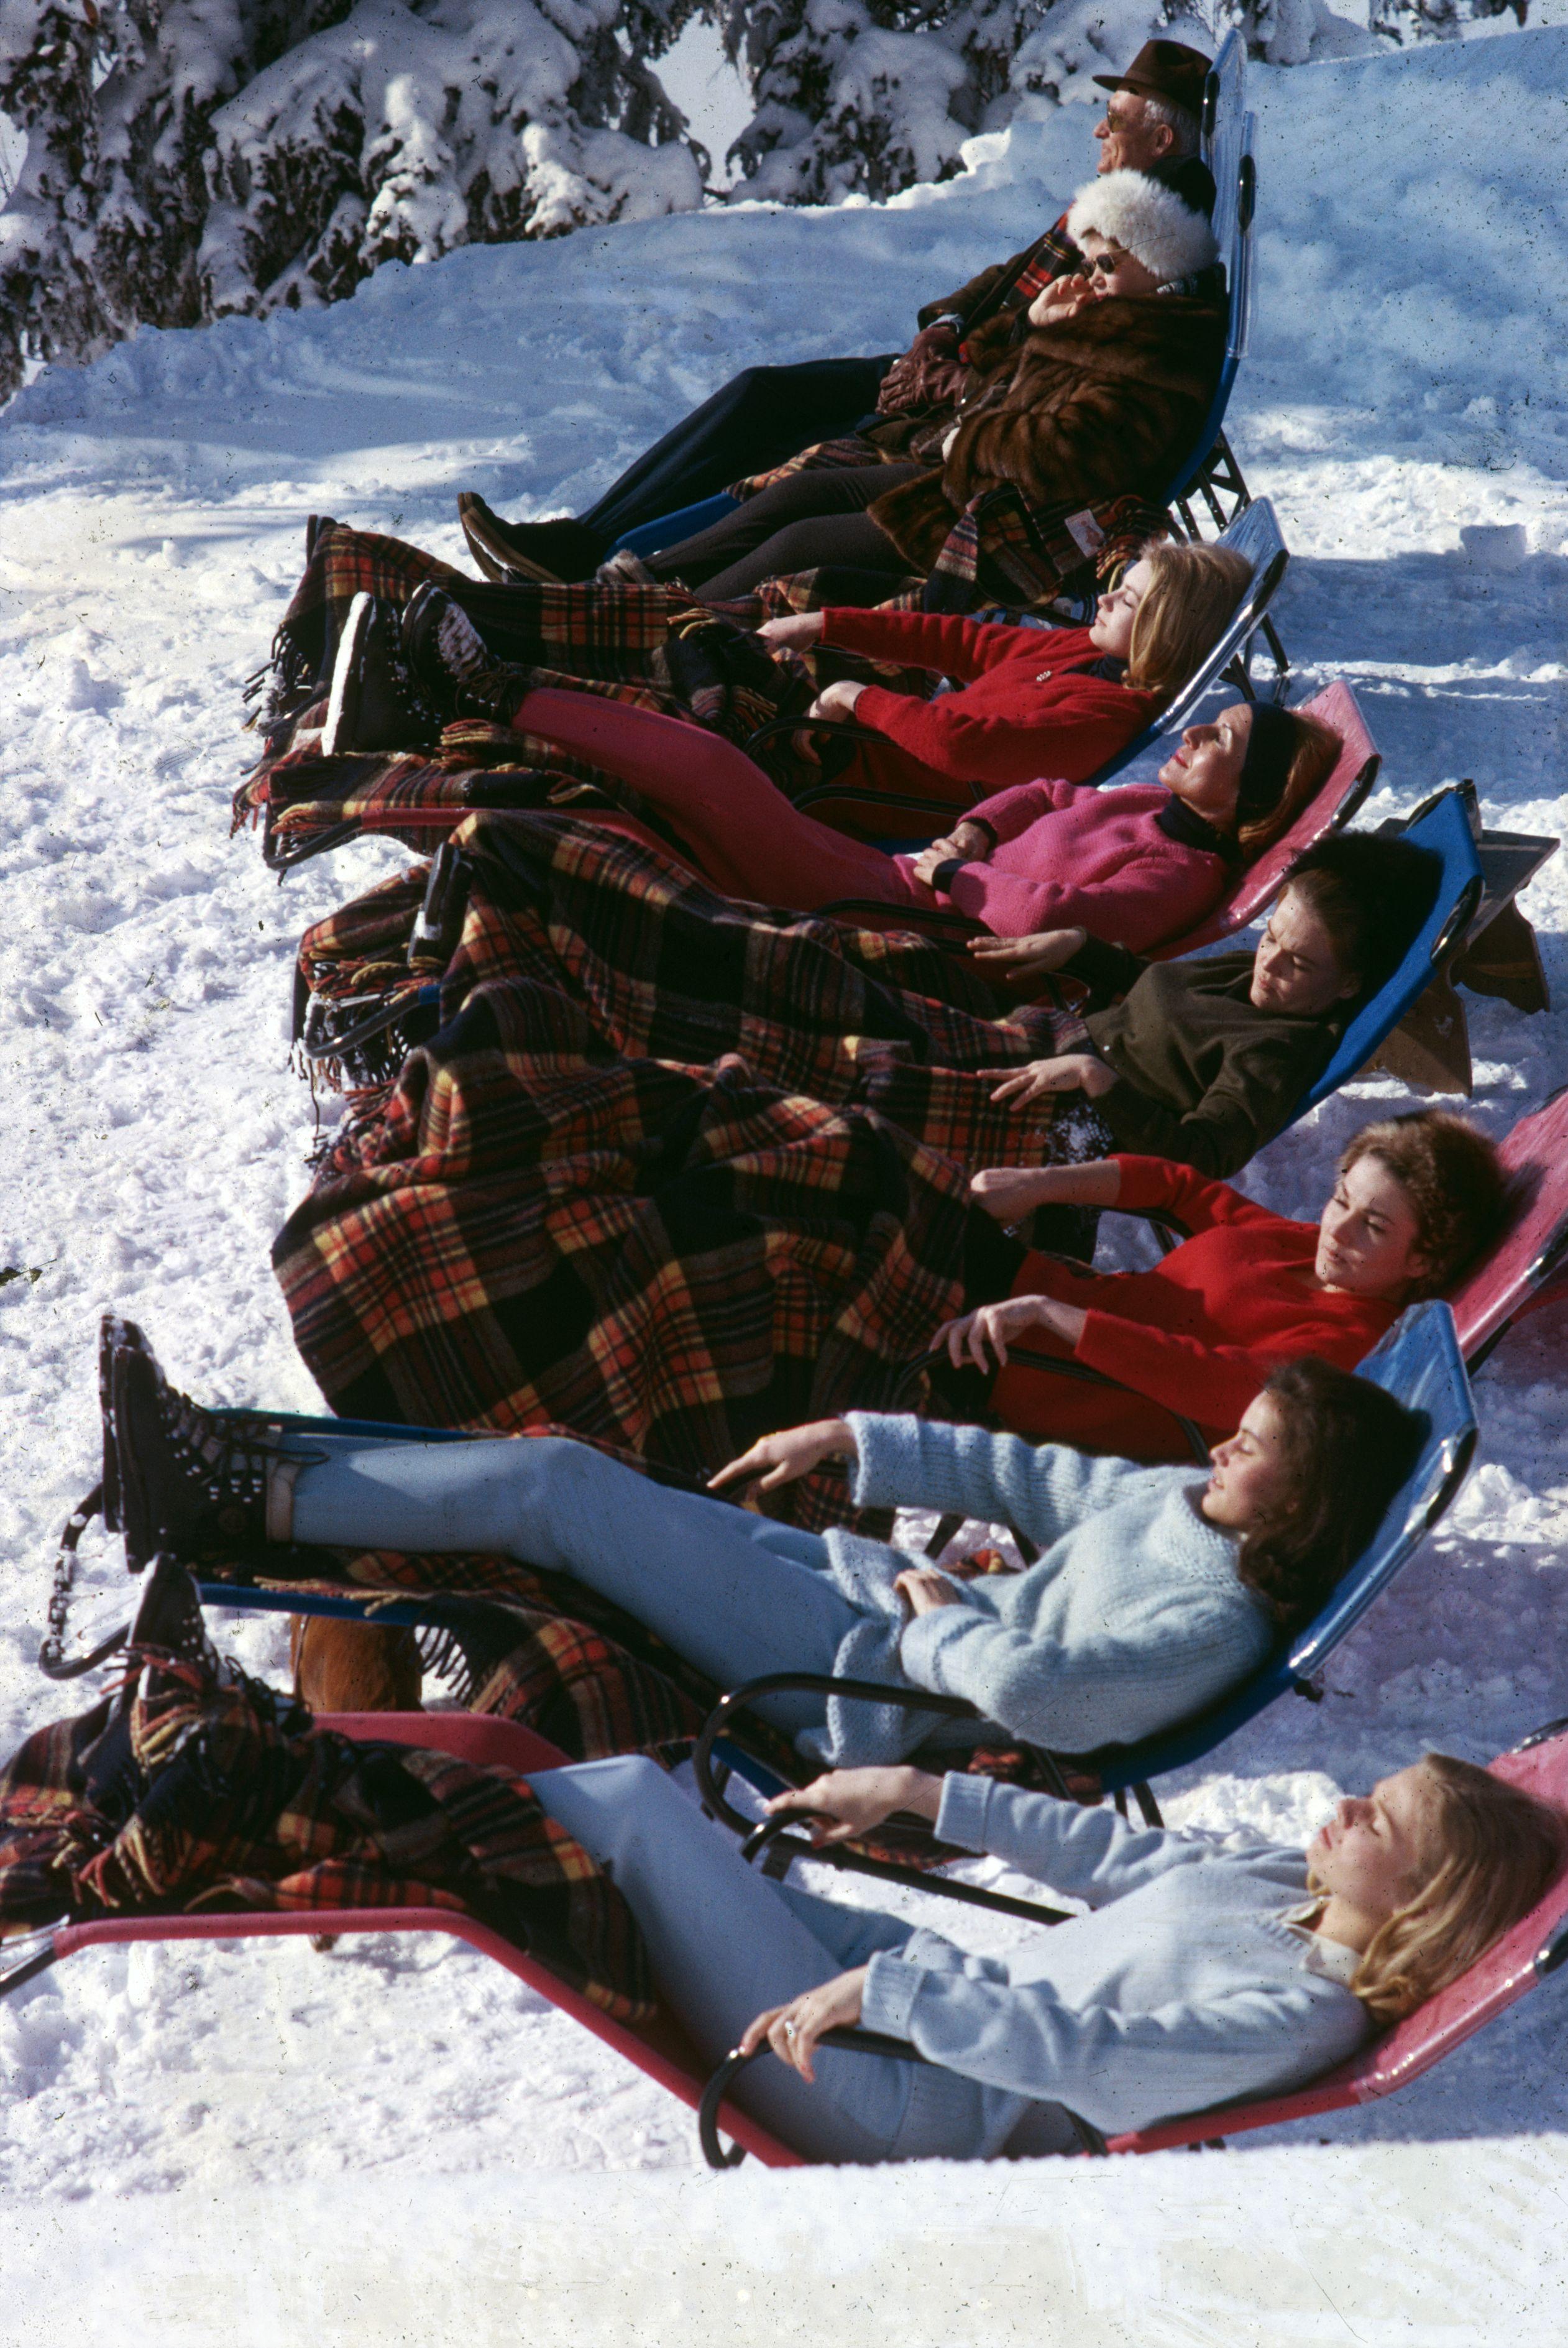 'Winter Suntans' 1961 Slim Aarons Limited Estate Edition

Young women enjoy a relaxing sunbathe in snowy Gstaad. 1961. 

Produced from the original transparency
Certificate of authenticity supplied 
30x40 inches / 76 x 102 cm paper size 

Authorised